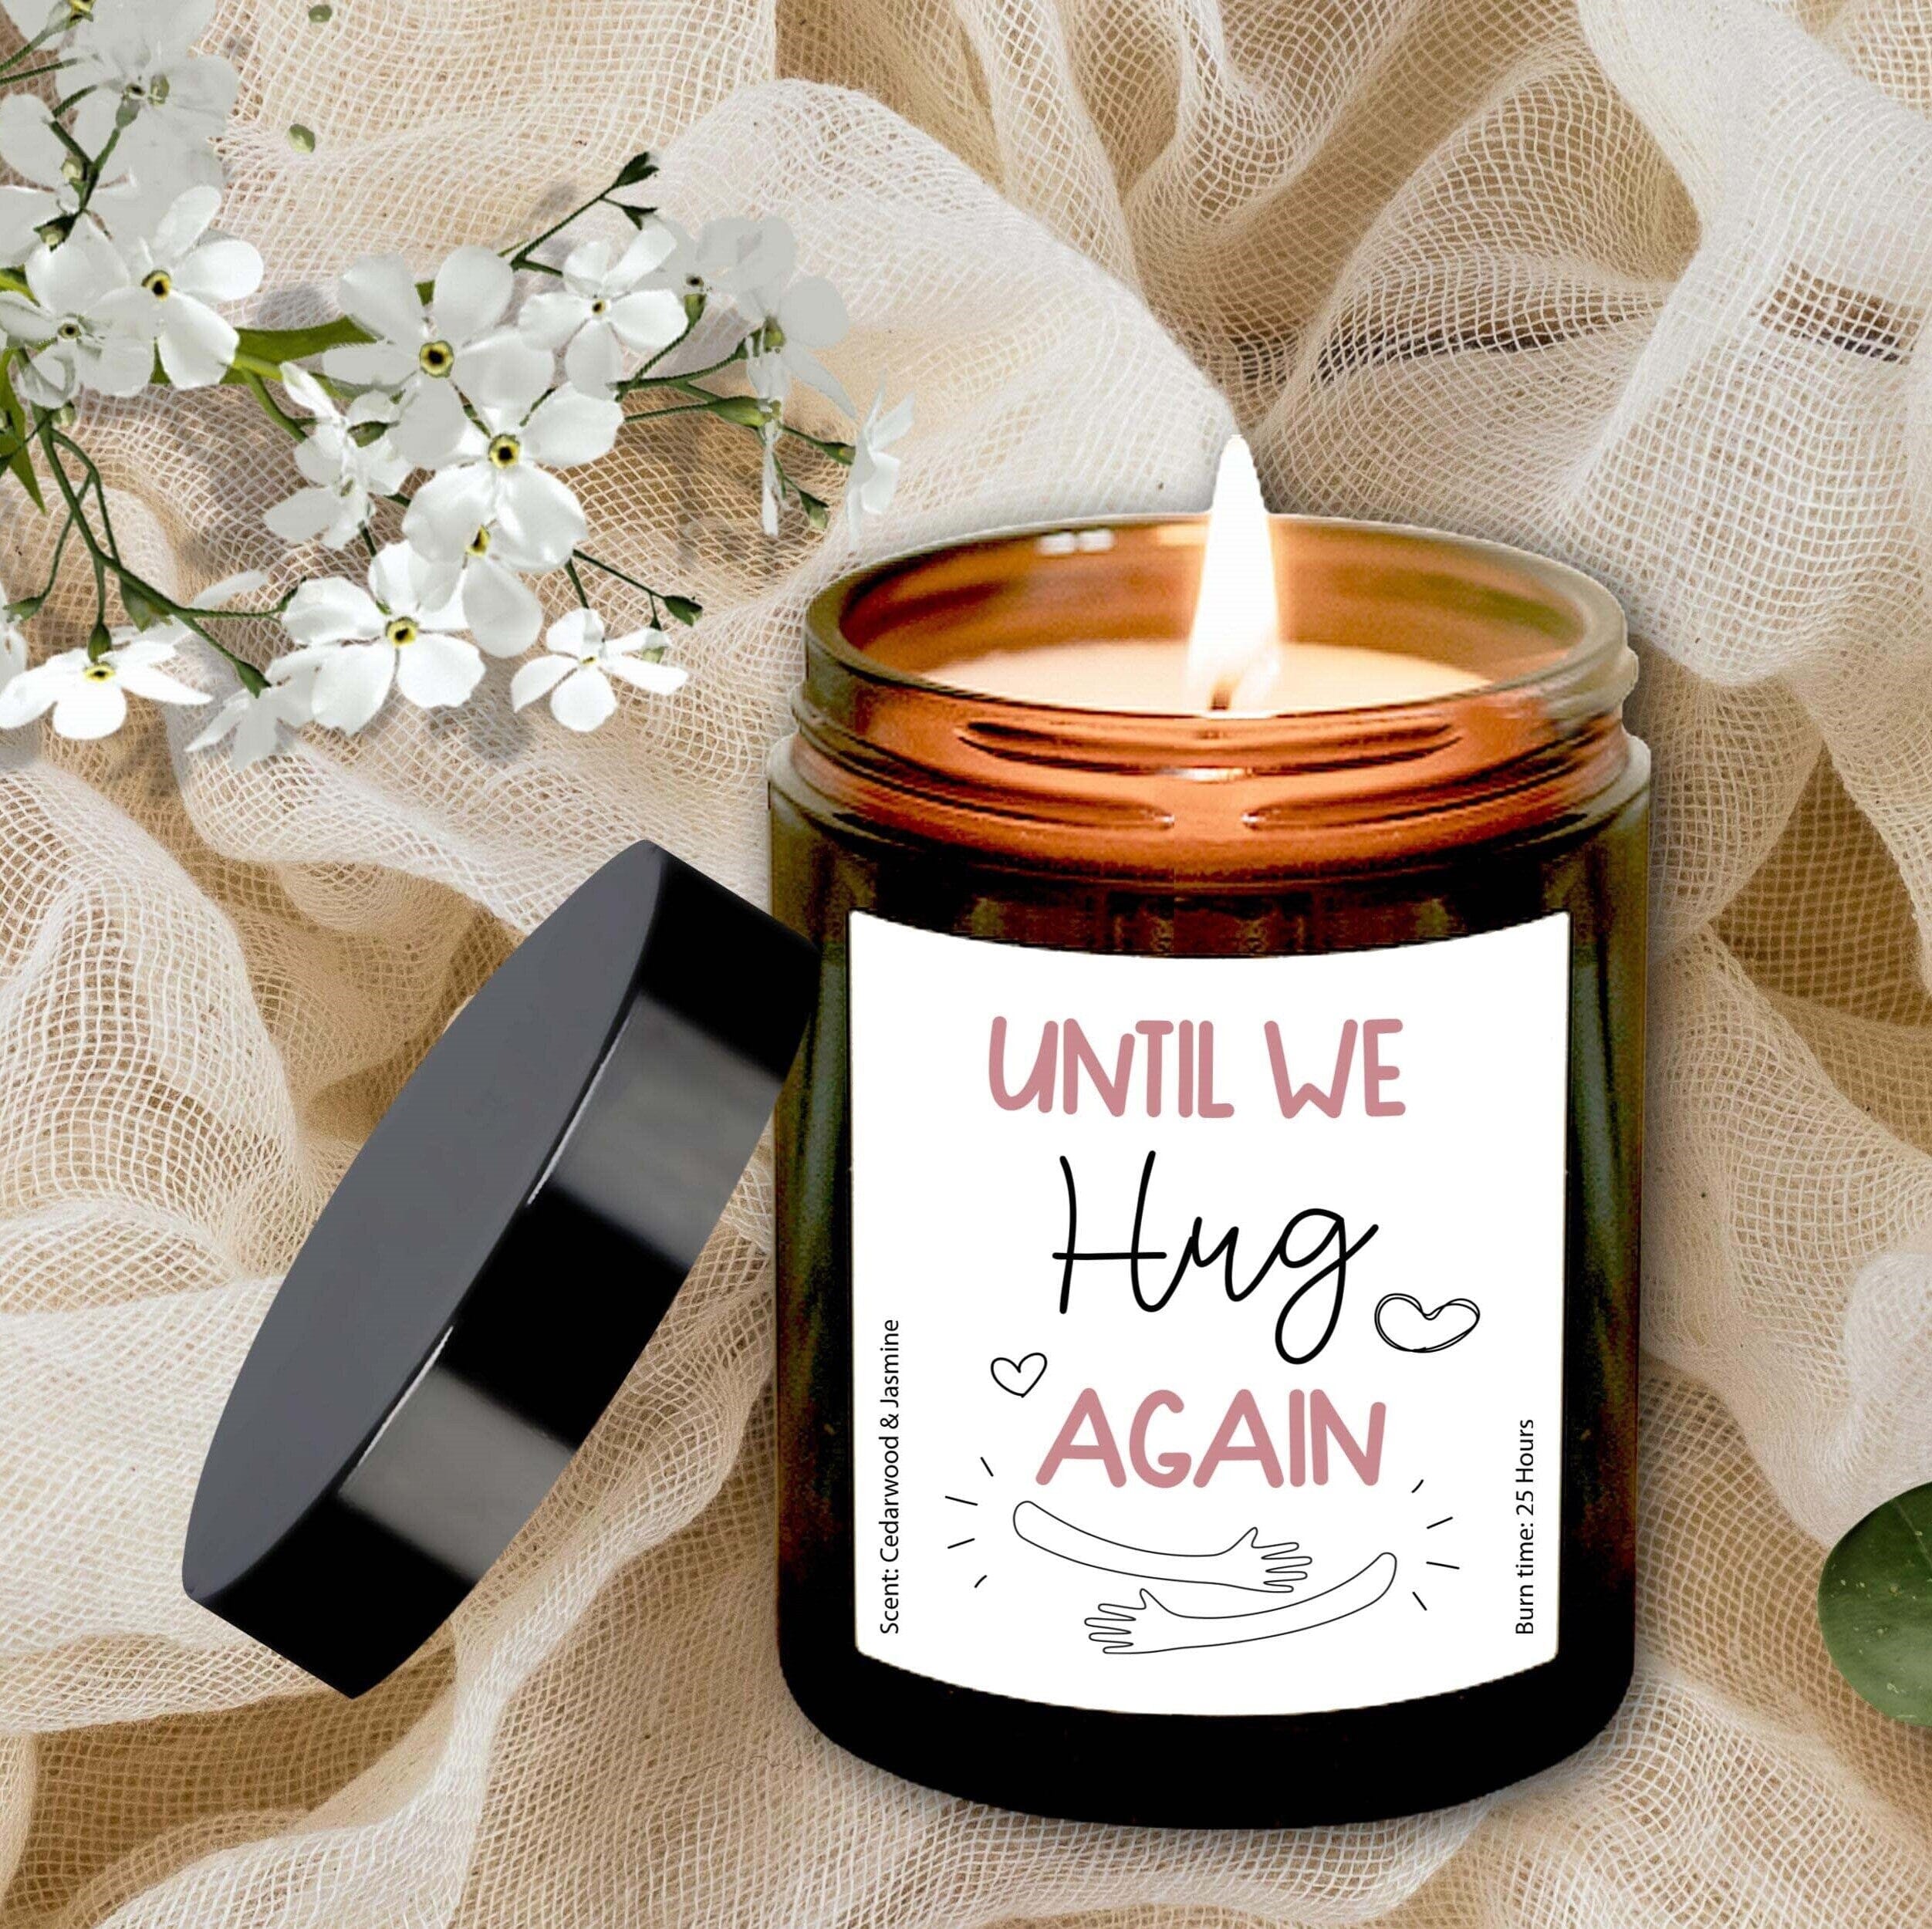 Until We Hug Again Scented Candle, Gift for her Hug in a Jar, Retirement Friendship Birthday Christmas Gift